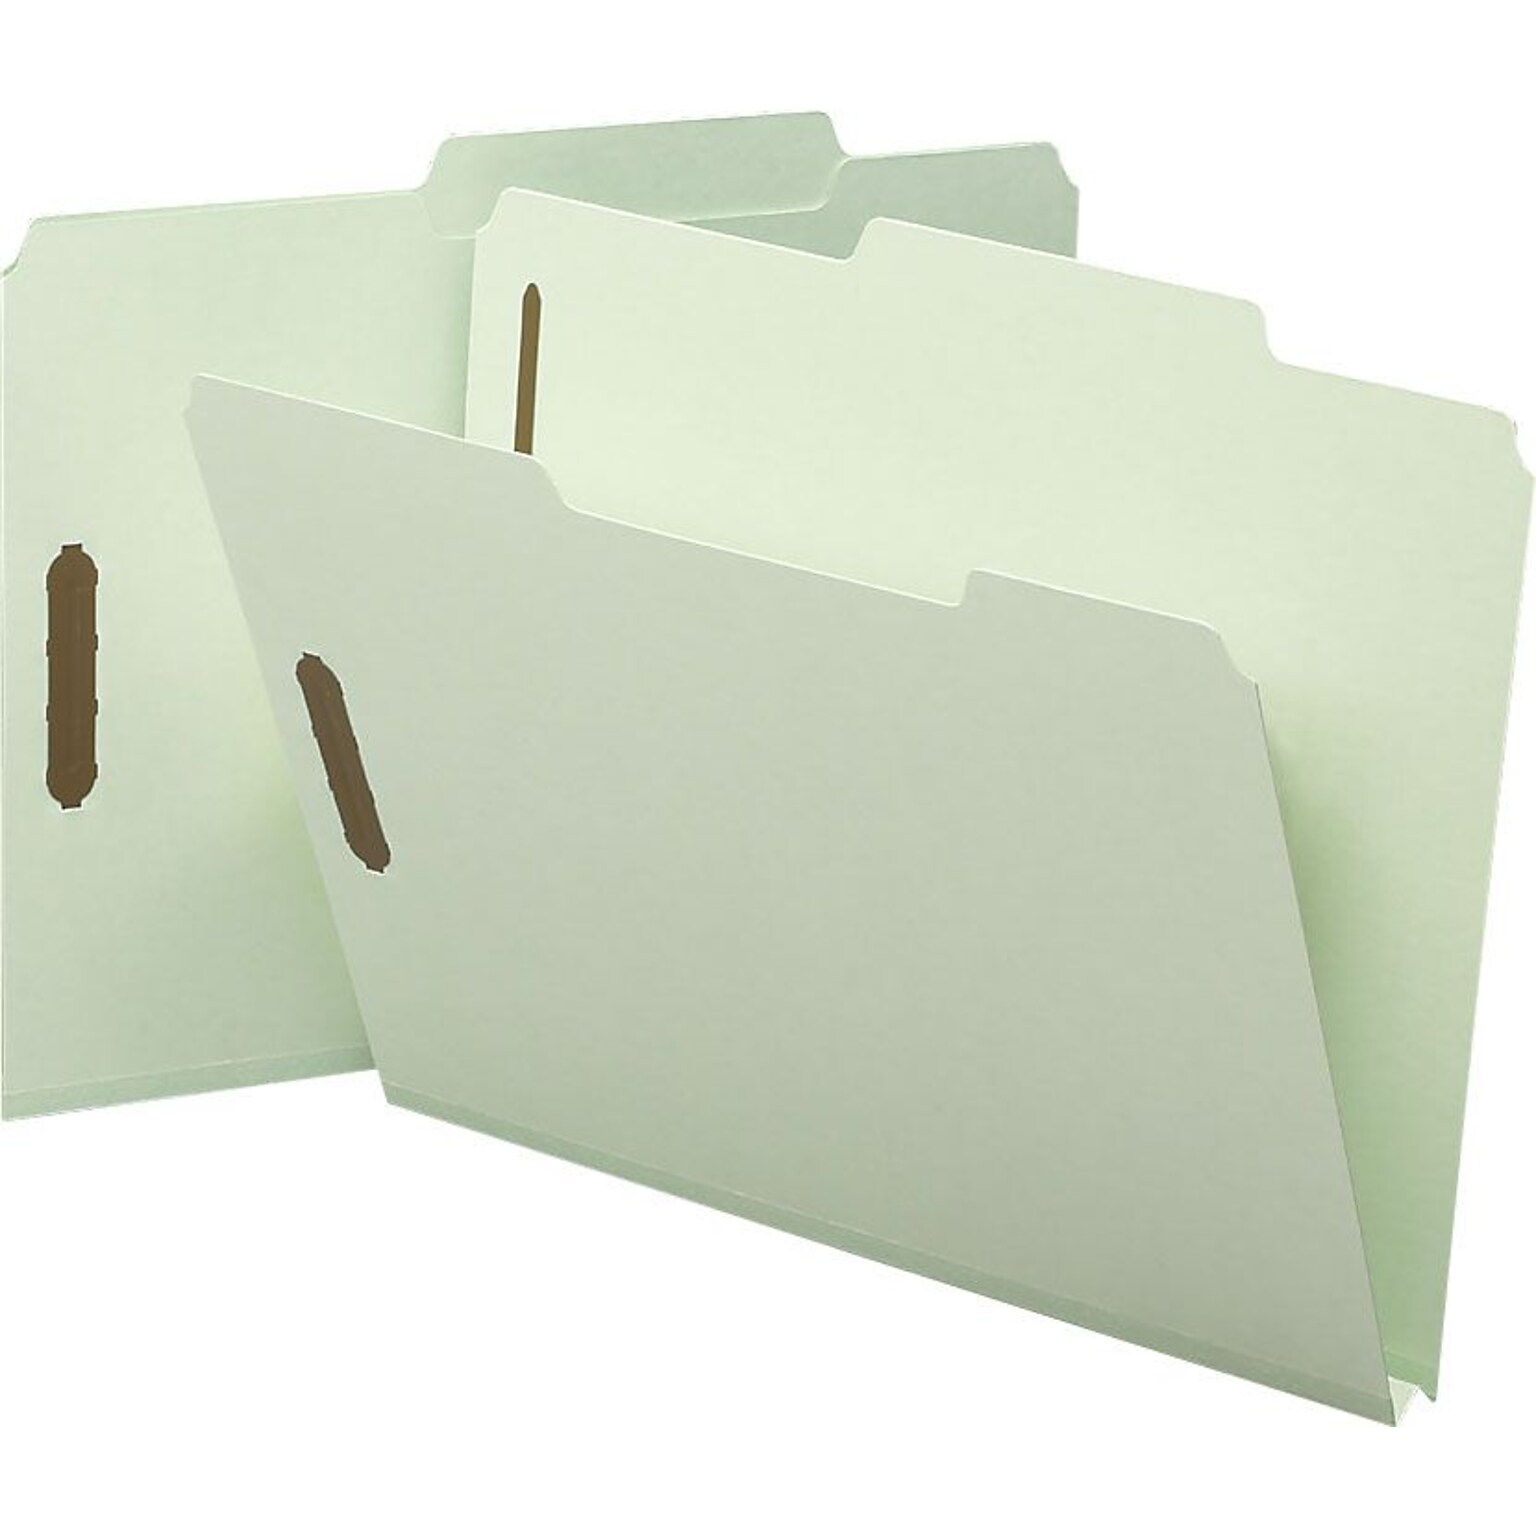 Smead SafeSHIELD® Recycled Heavy Duty Pressboard Classification Folder, 1 Expansion, Letter Size, Gray/Green, 25/Box (14980)